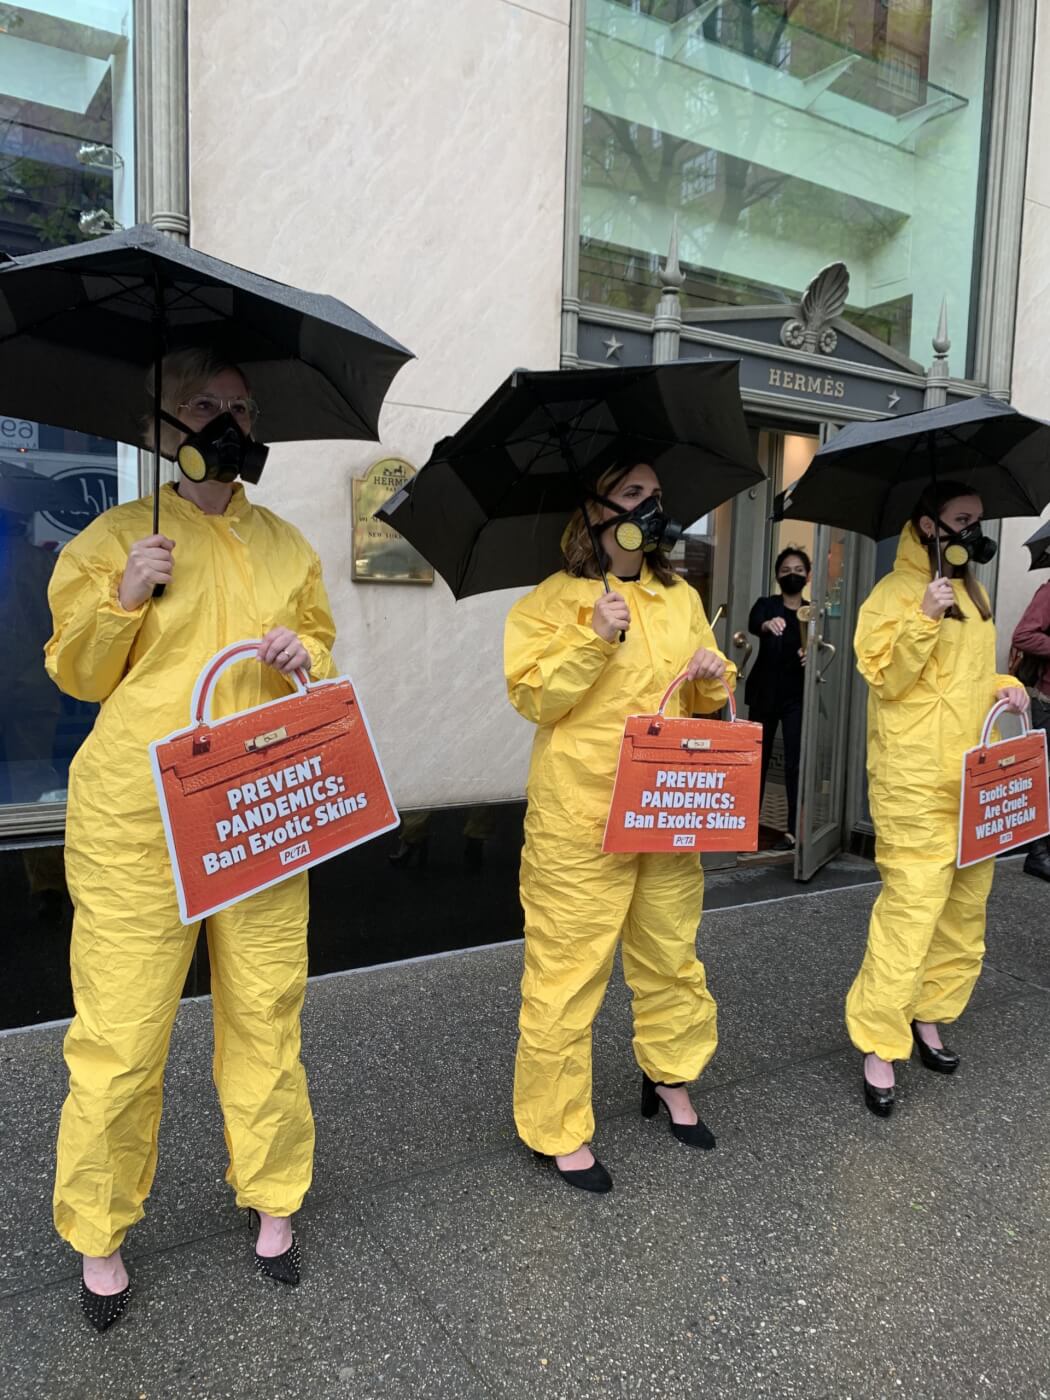 PETA protest outside Hermes NYC boutique store